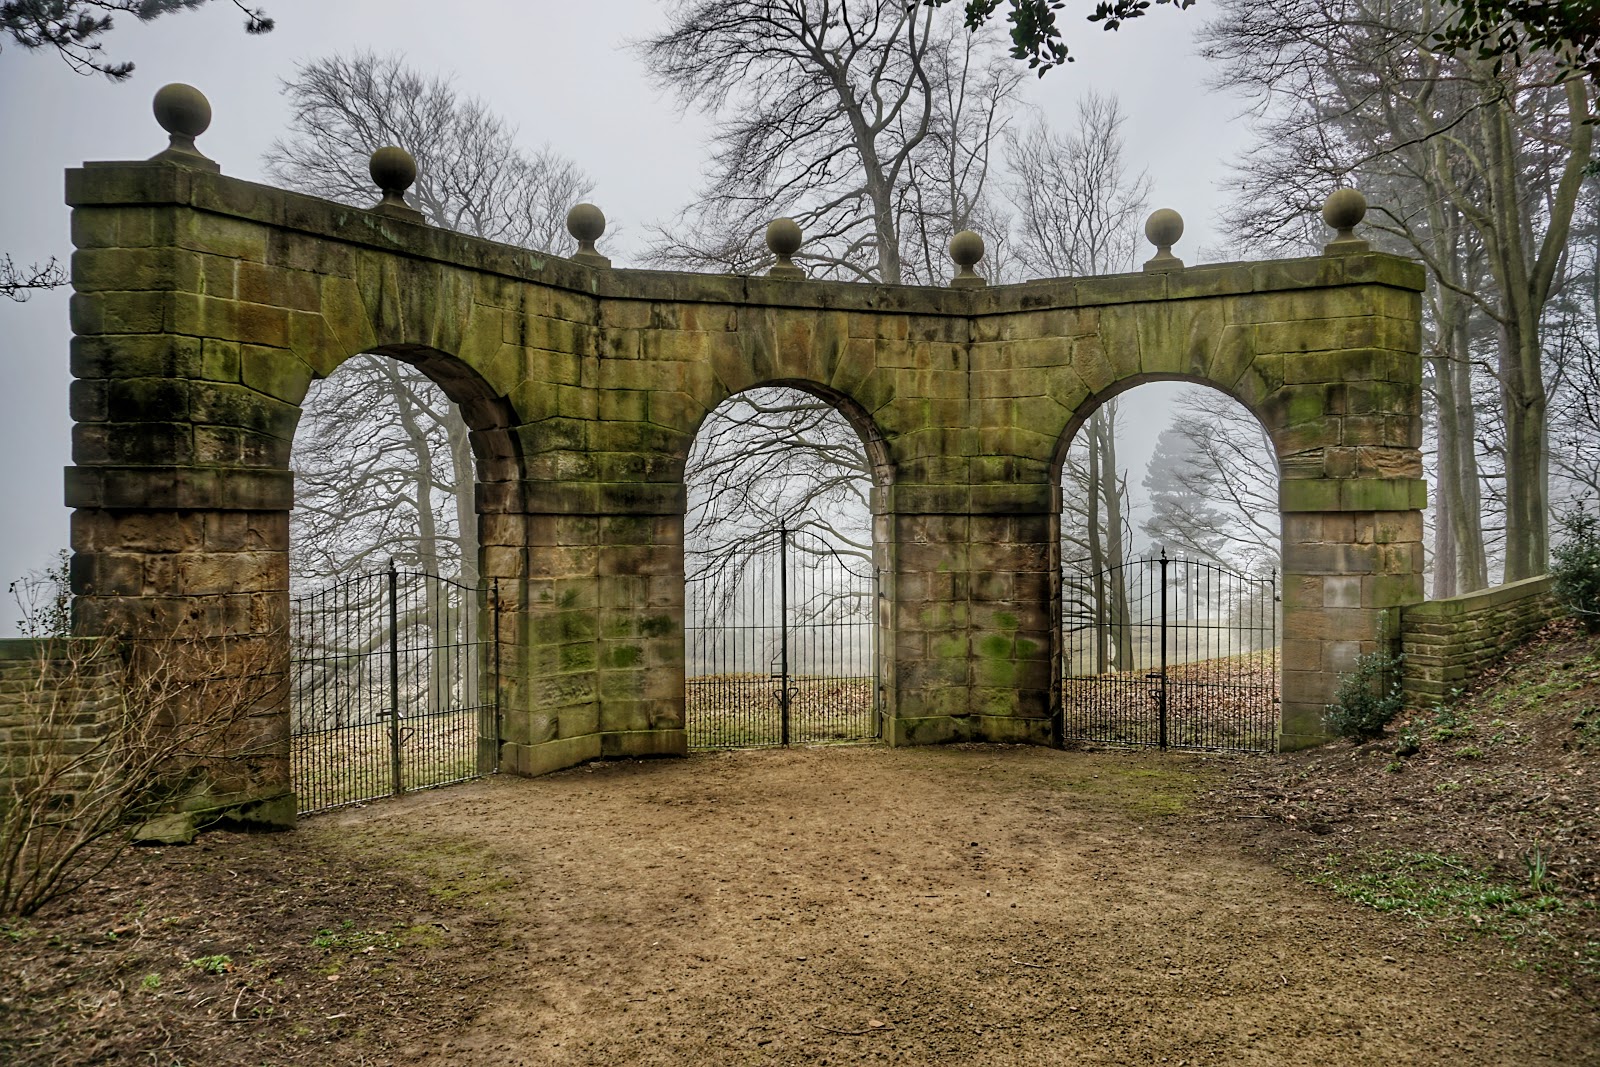 https://whatremovals.co.uk/wp-content/uploads/2022/02/National Trust - Wentworth Castle Gardens-300x200.jpeg